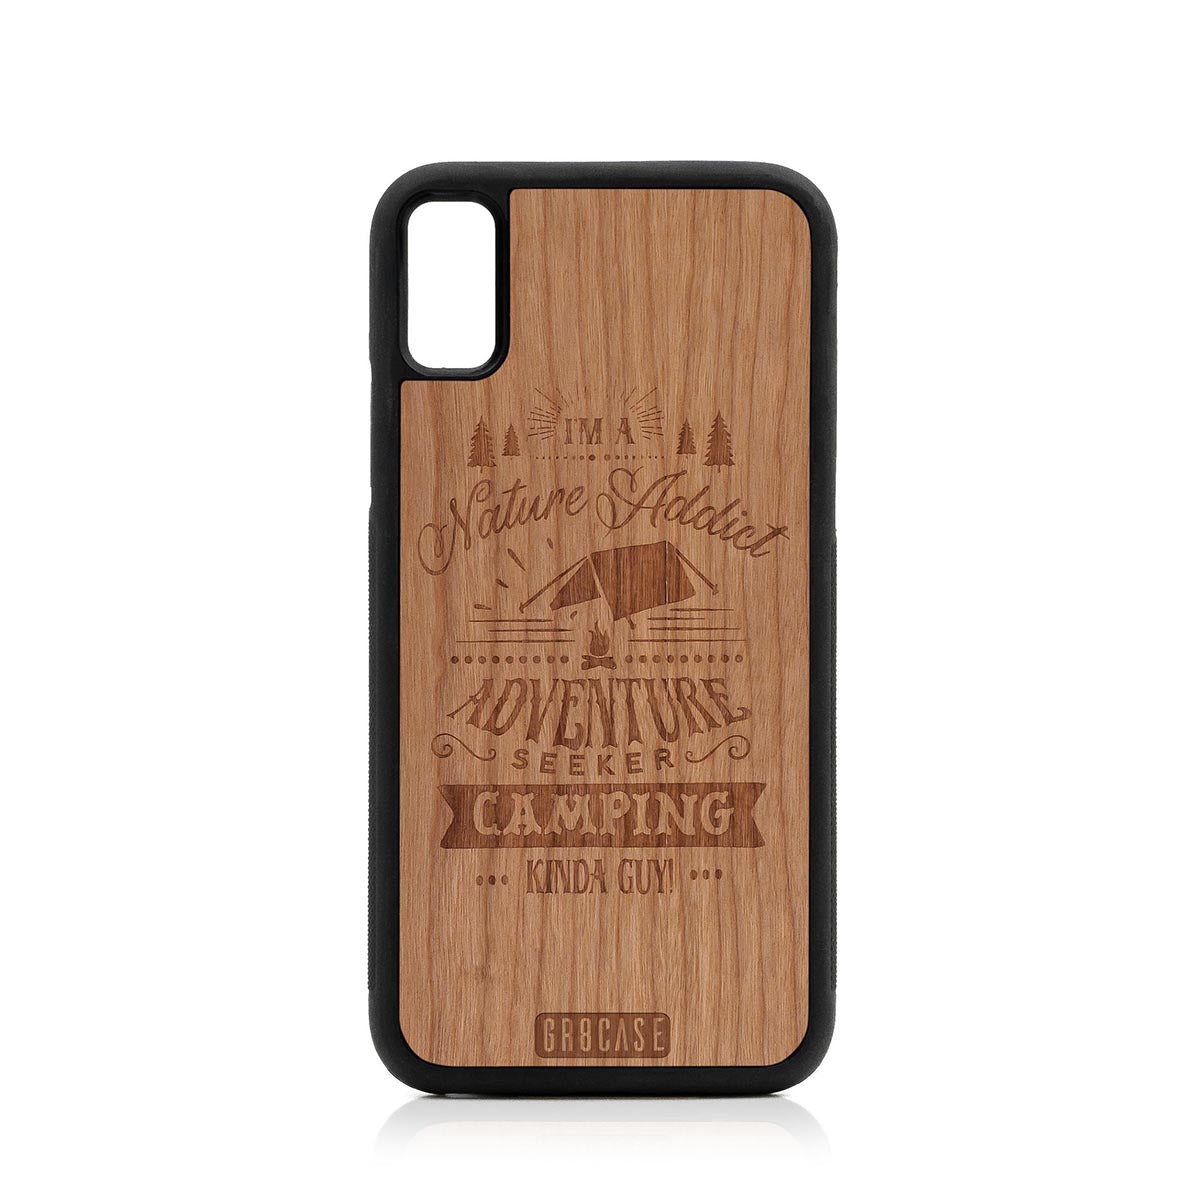 I'm A Nature Addict Adventure Seeker Camping Kinda Guy Design Wood Case For iPhone XS Max by GR8CASE